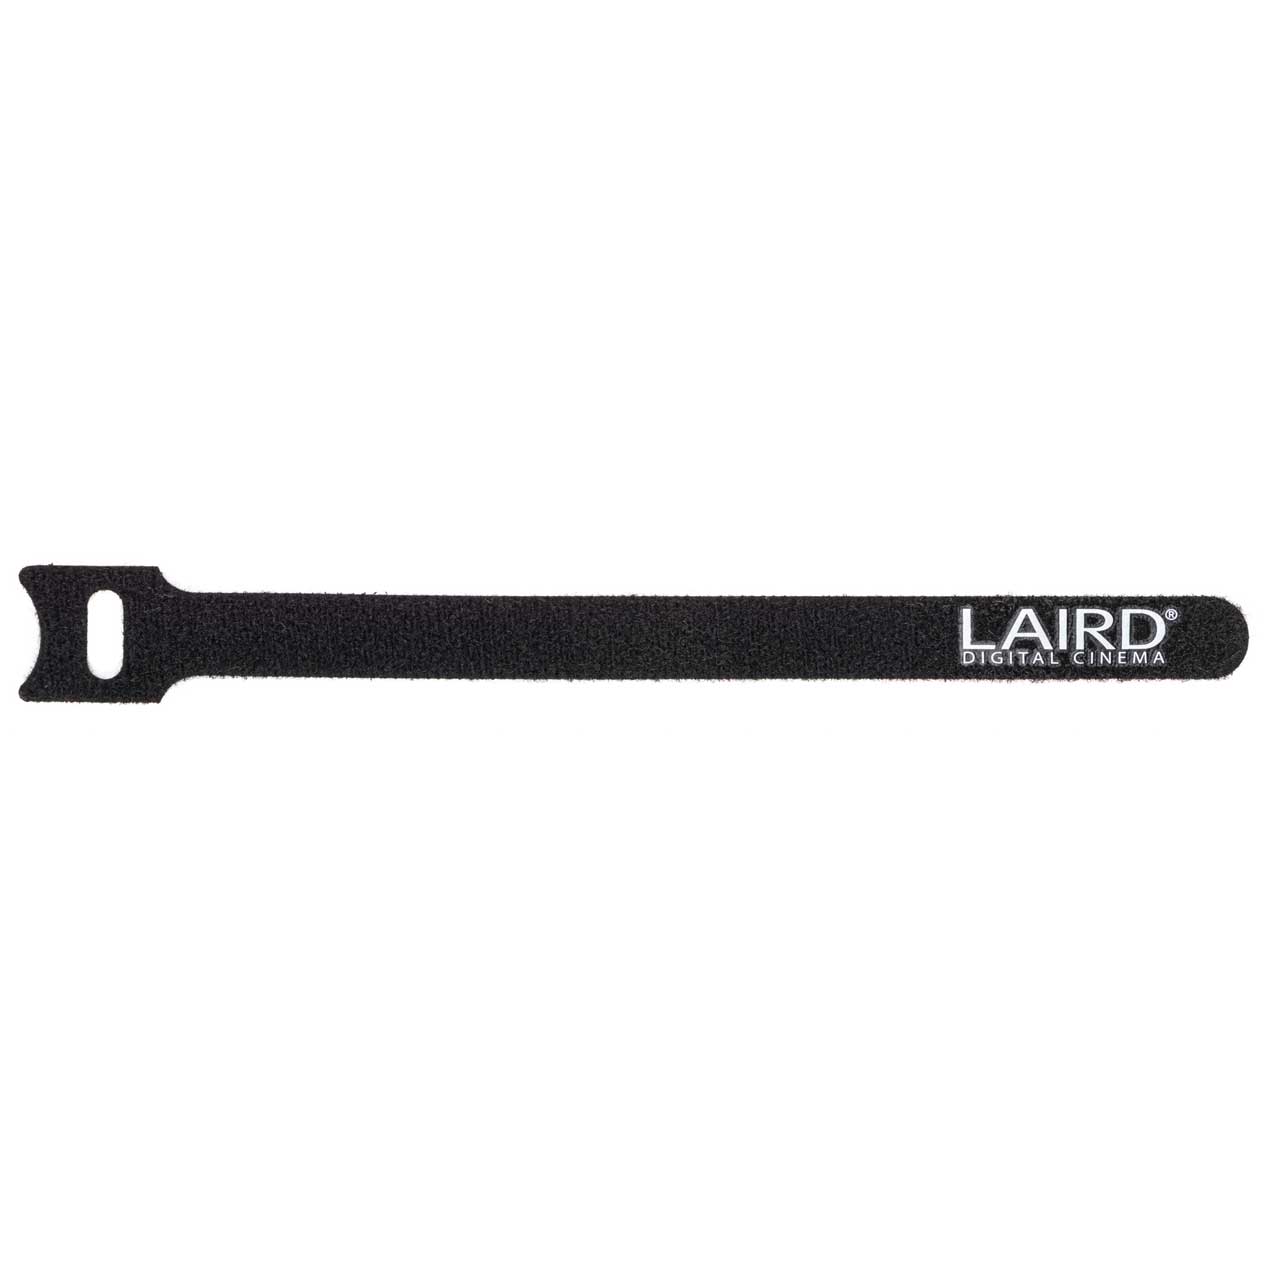 Laird Hook and Loop Cable Wrap 12mm x 180mm Black with White Logo - 10 Pack LDC-HKNLP-10PK